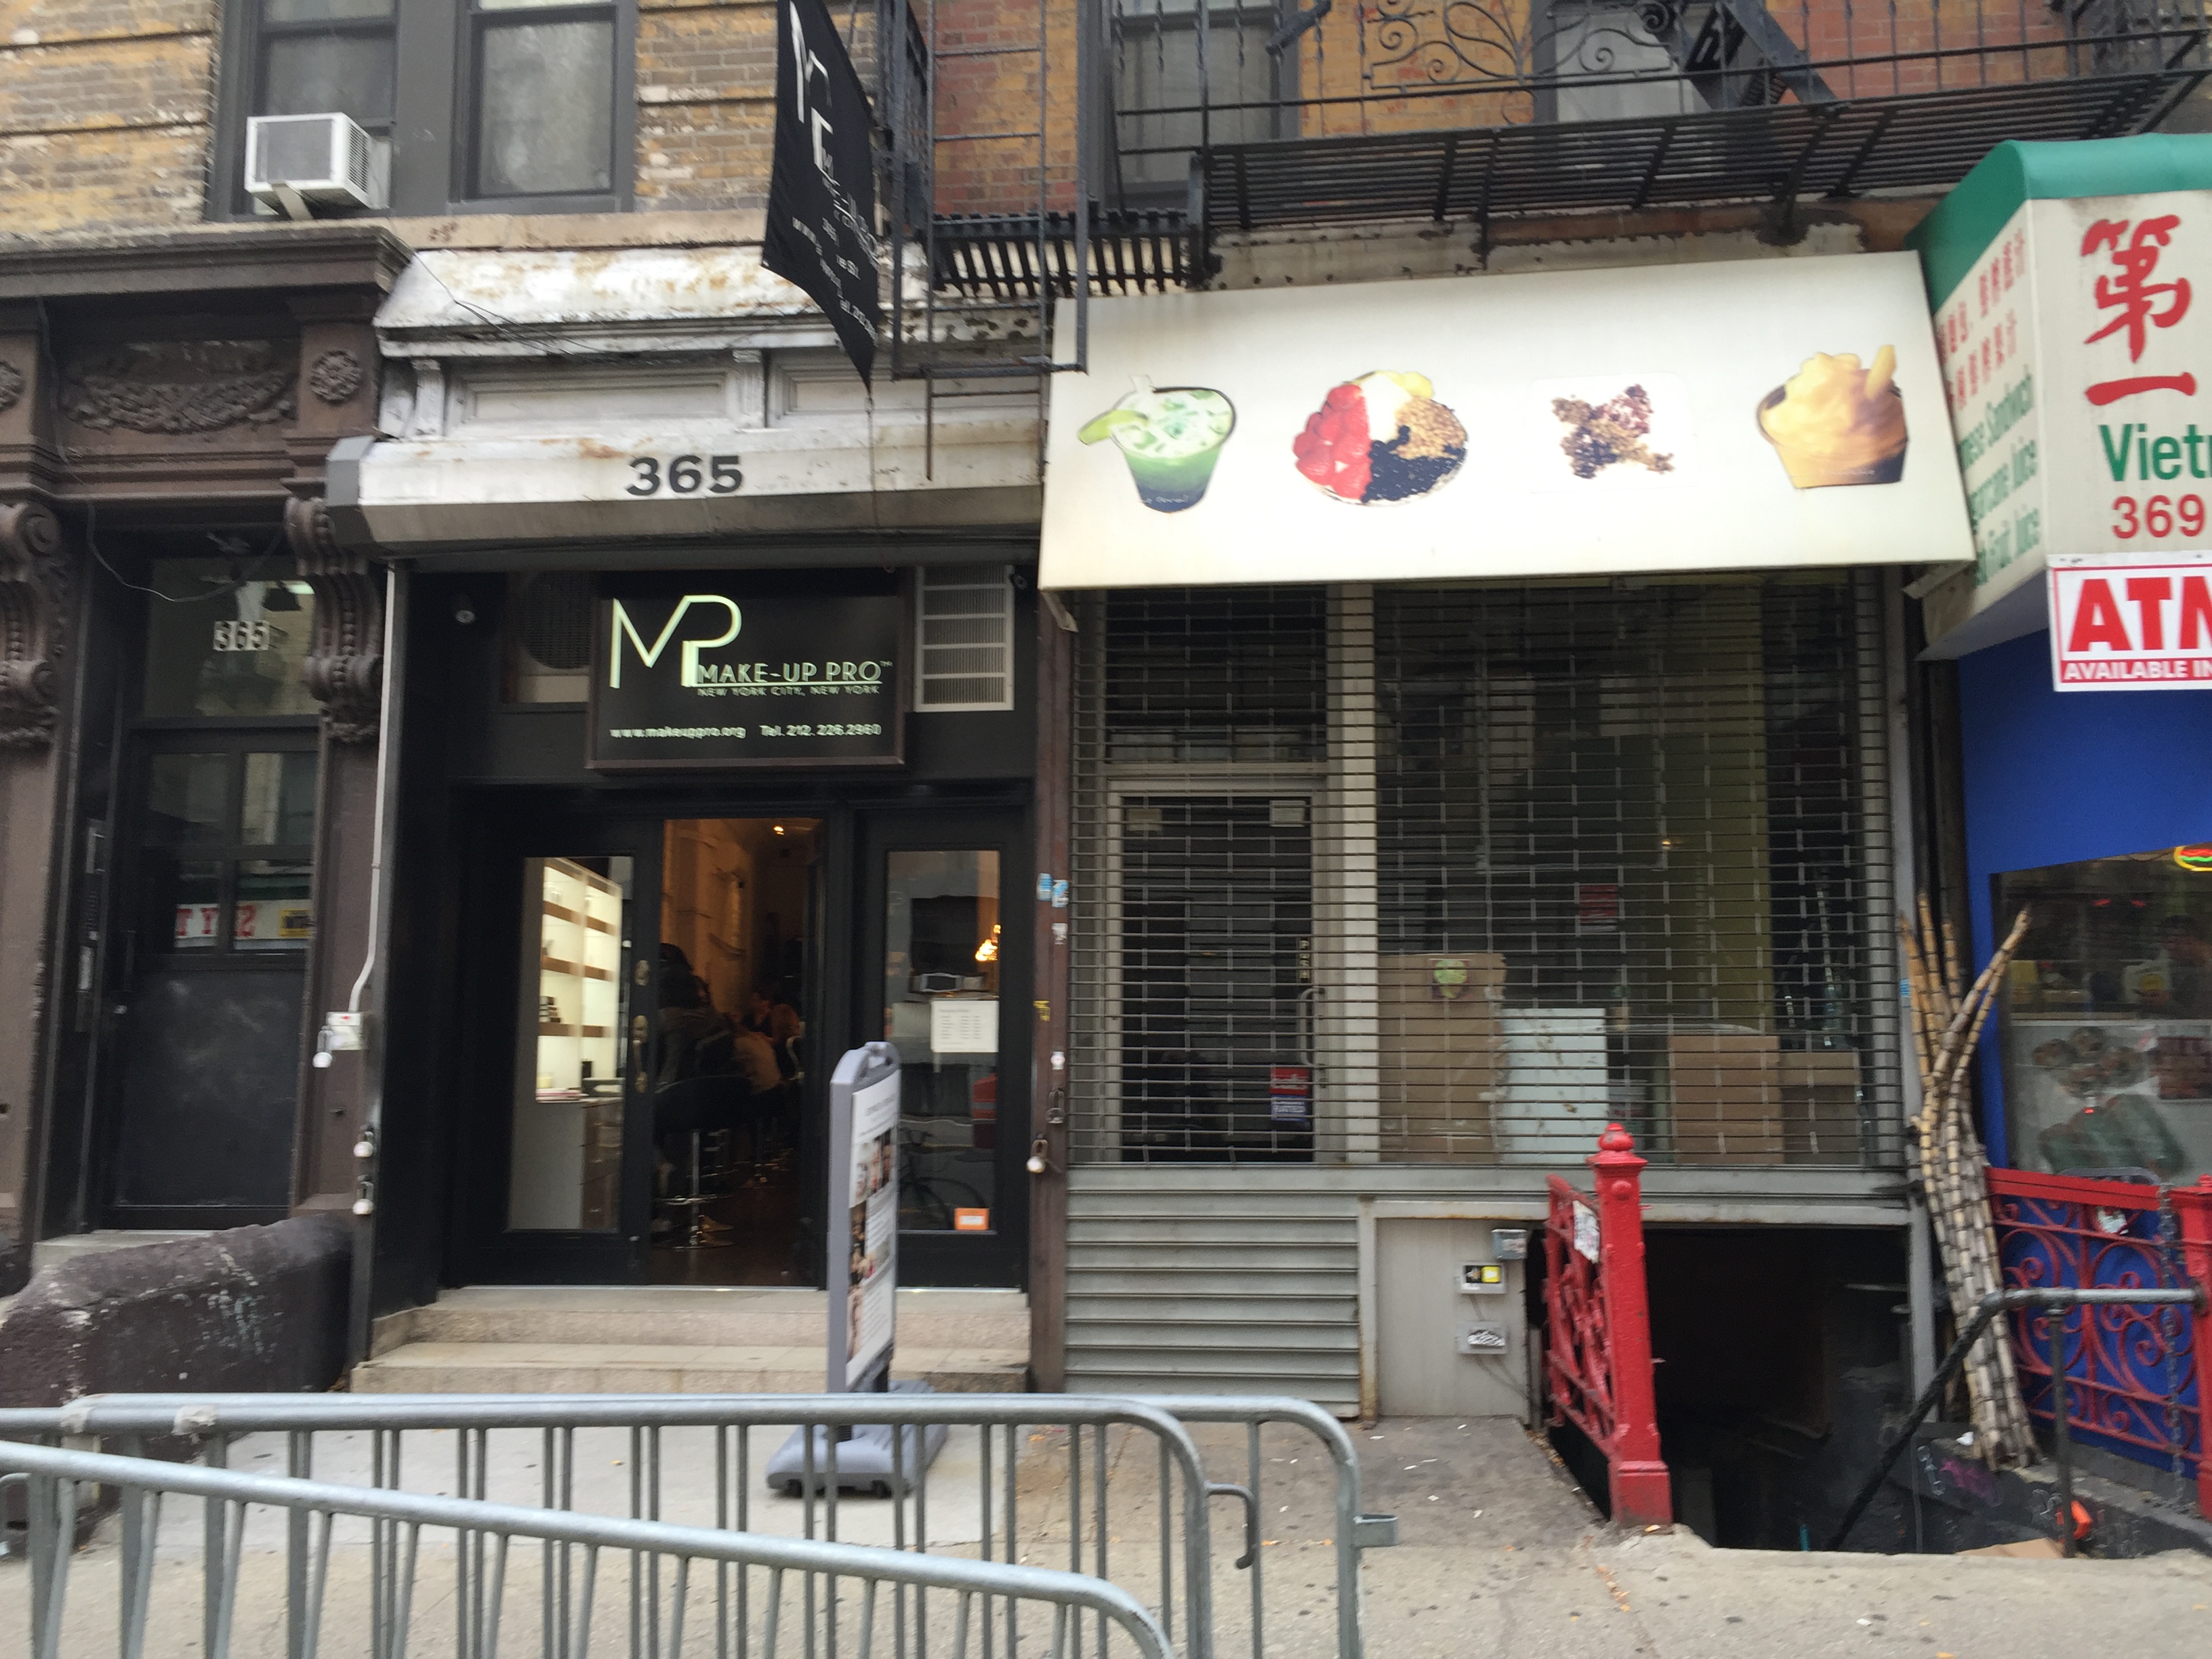 Prosperity Dumpling may be moving into this space on Broome Street.